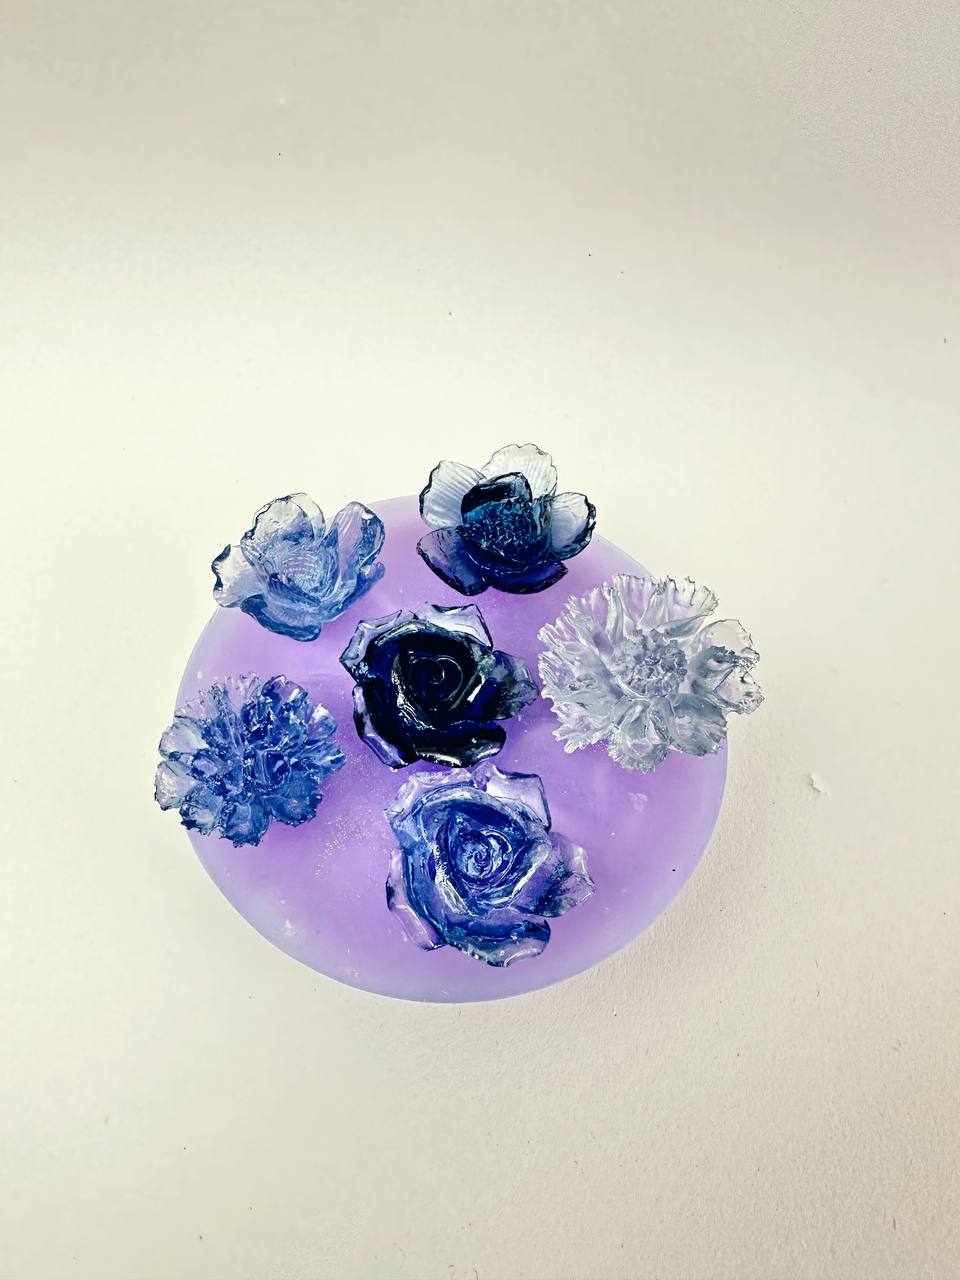 Petite 3D Floral Silicone Resin Molds - 6 Small Flower Designs for Crafting Epoxy Resin